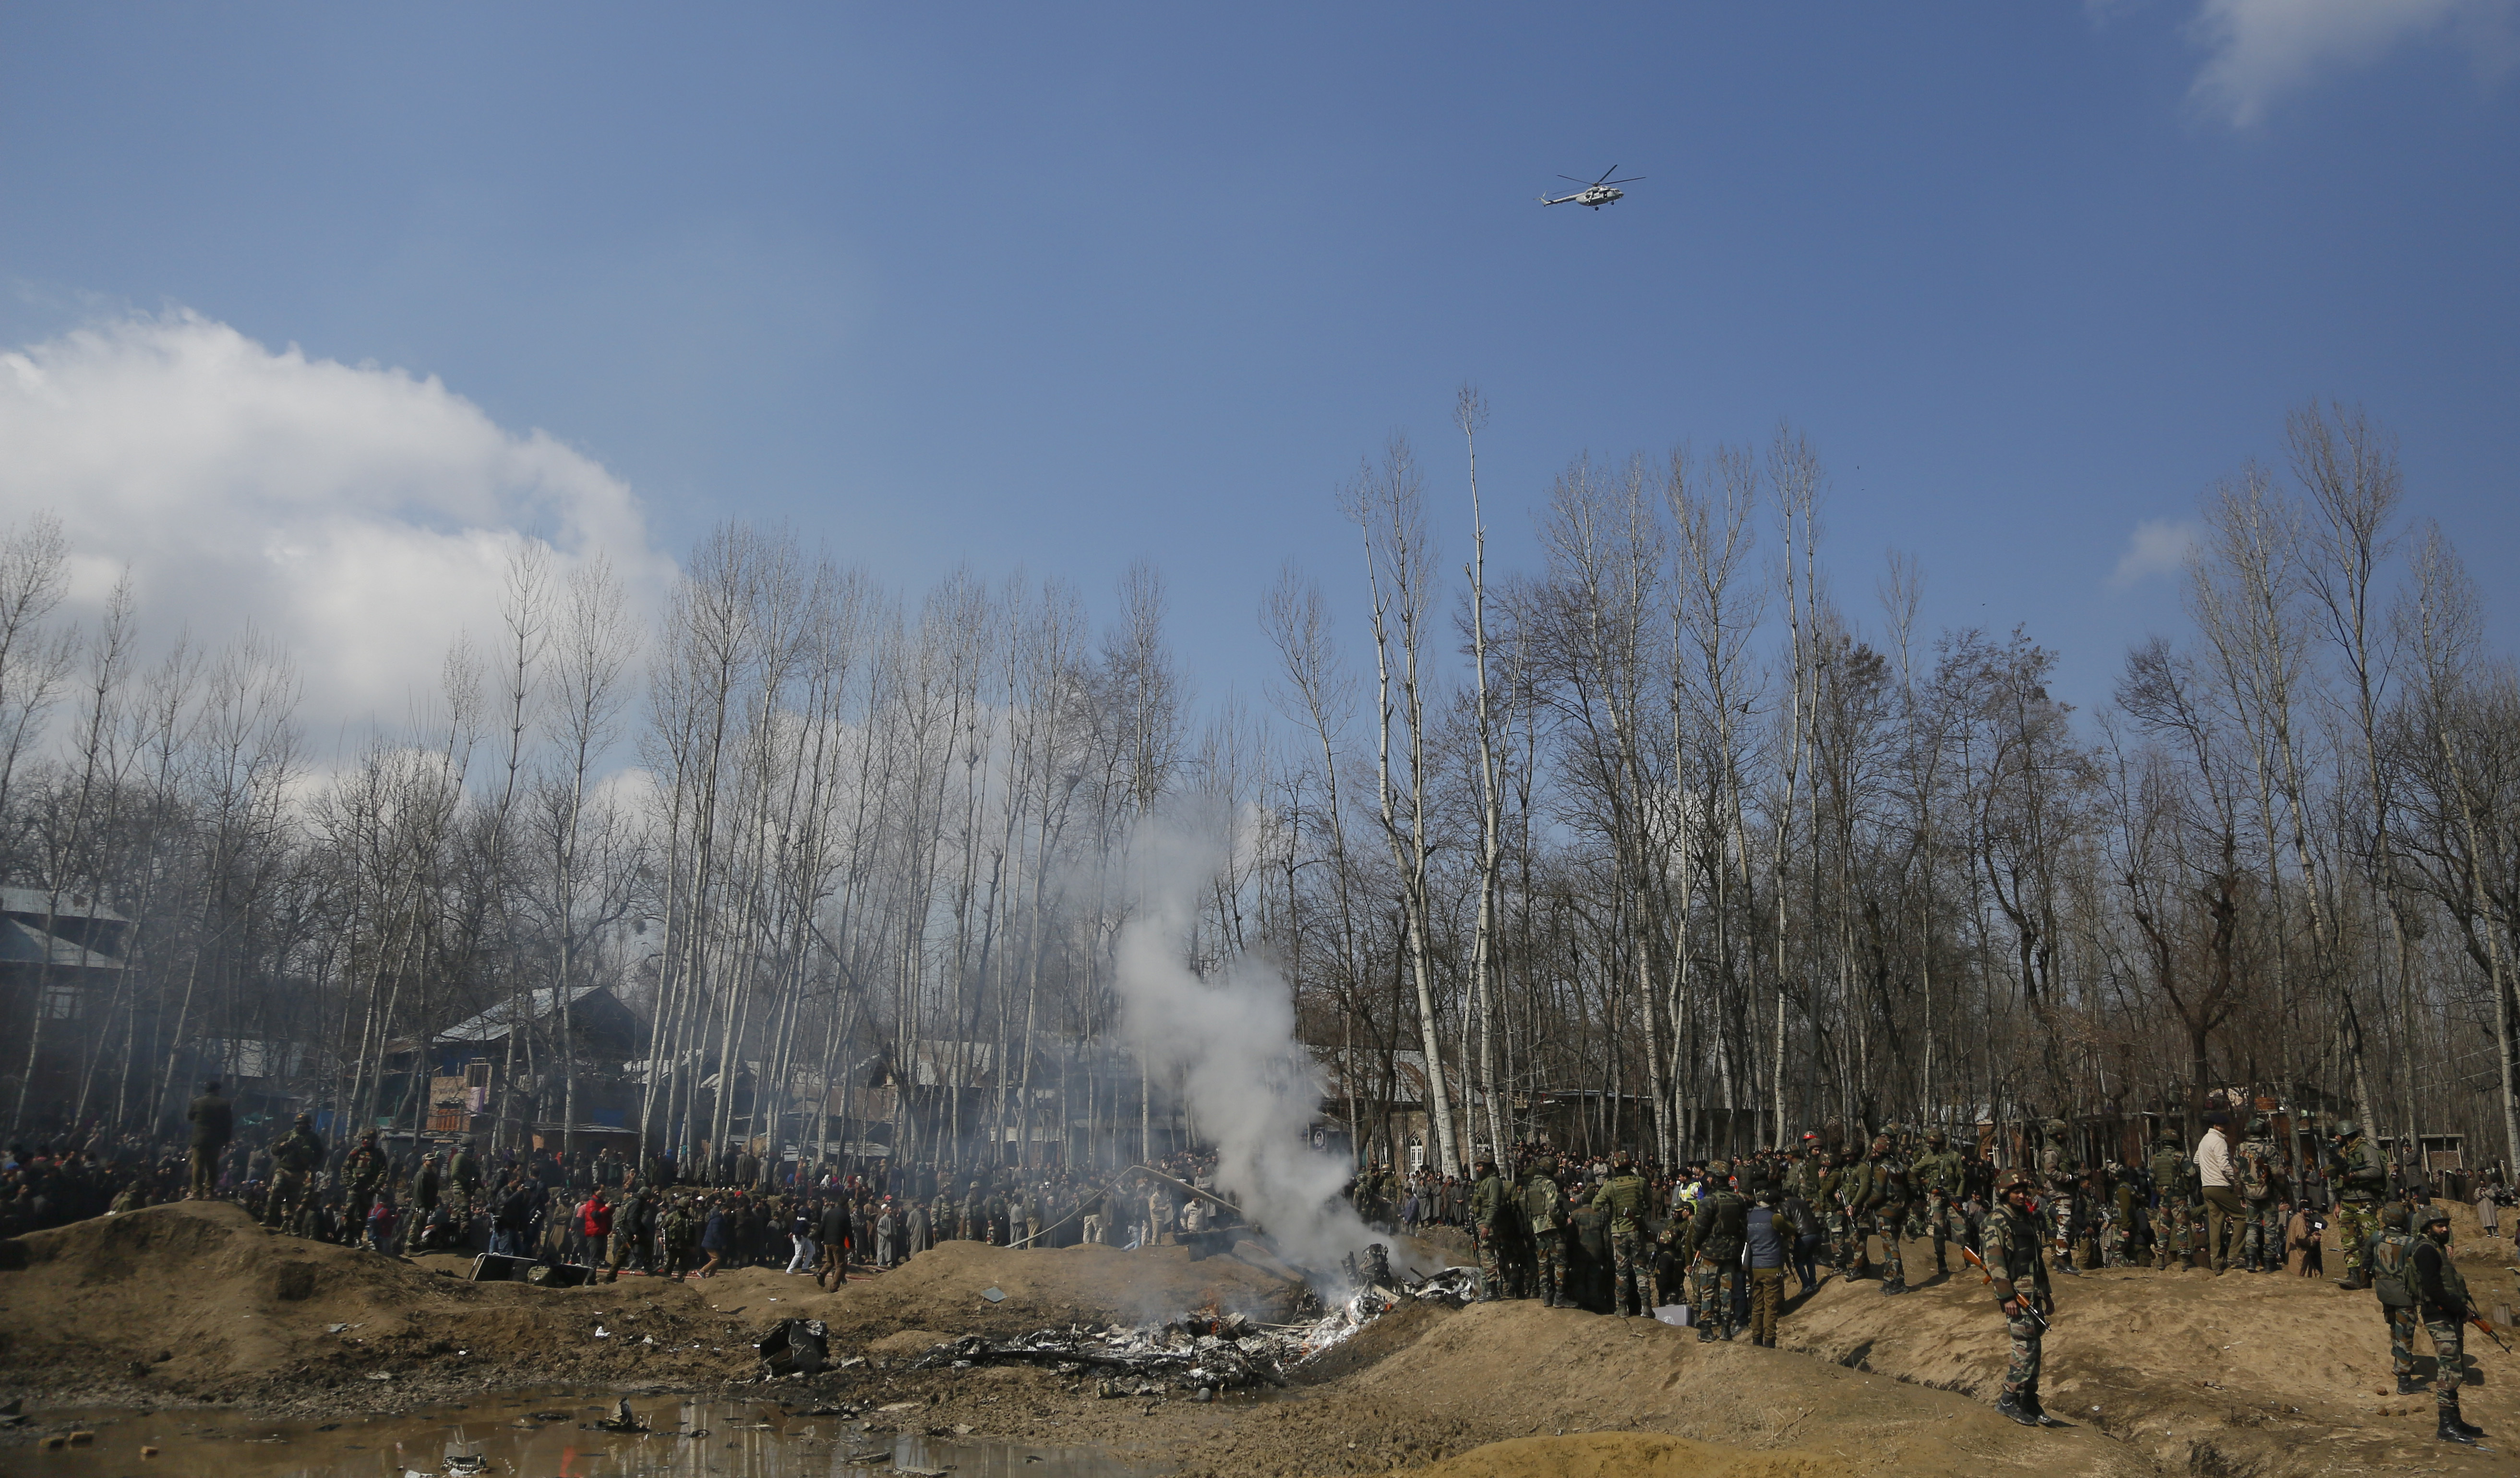 Pakistan, India trade fire in Kashmir; villagers flee homes